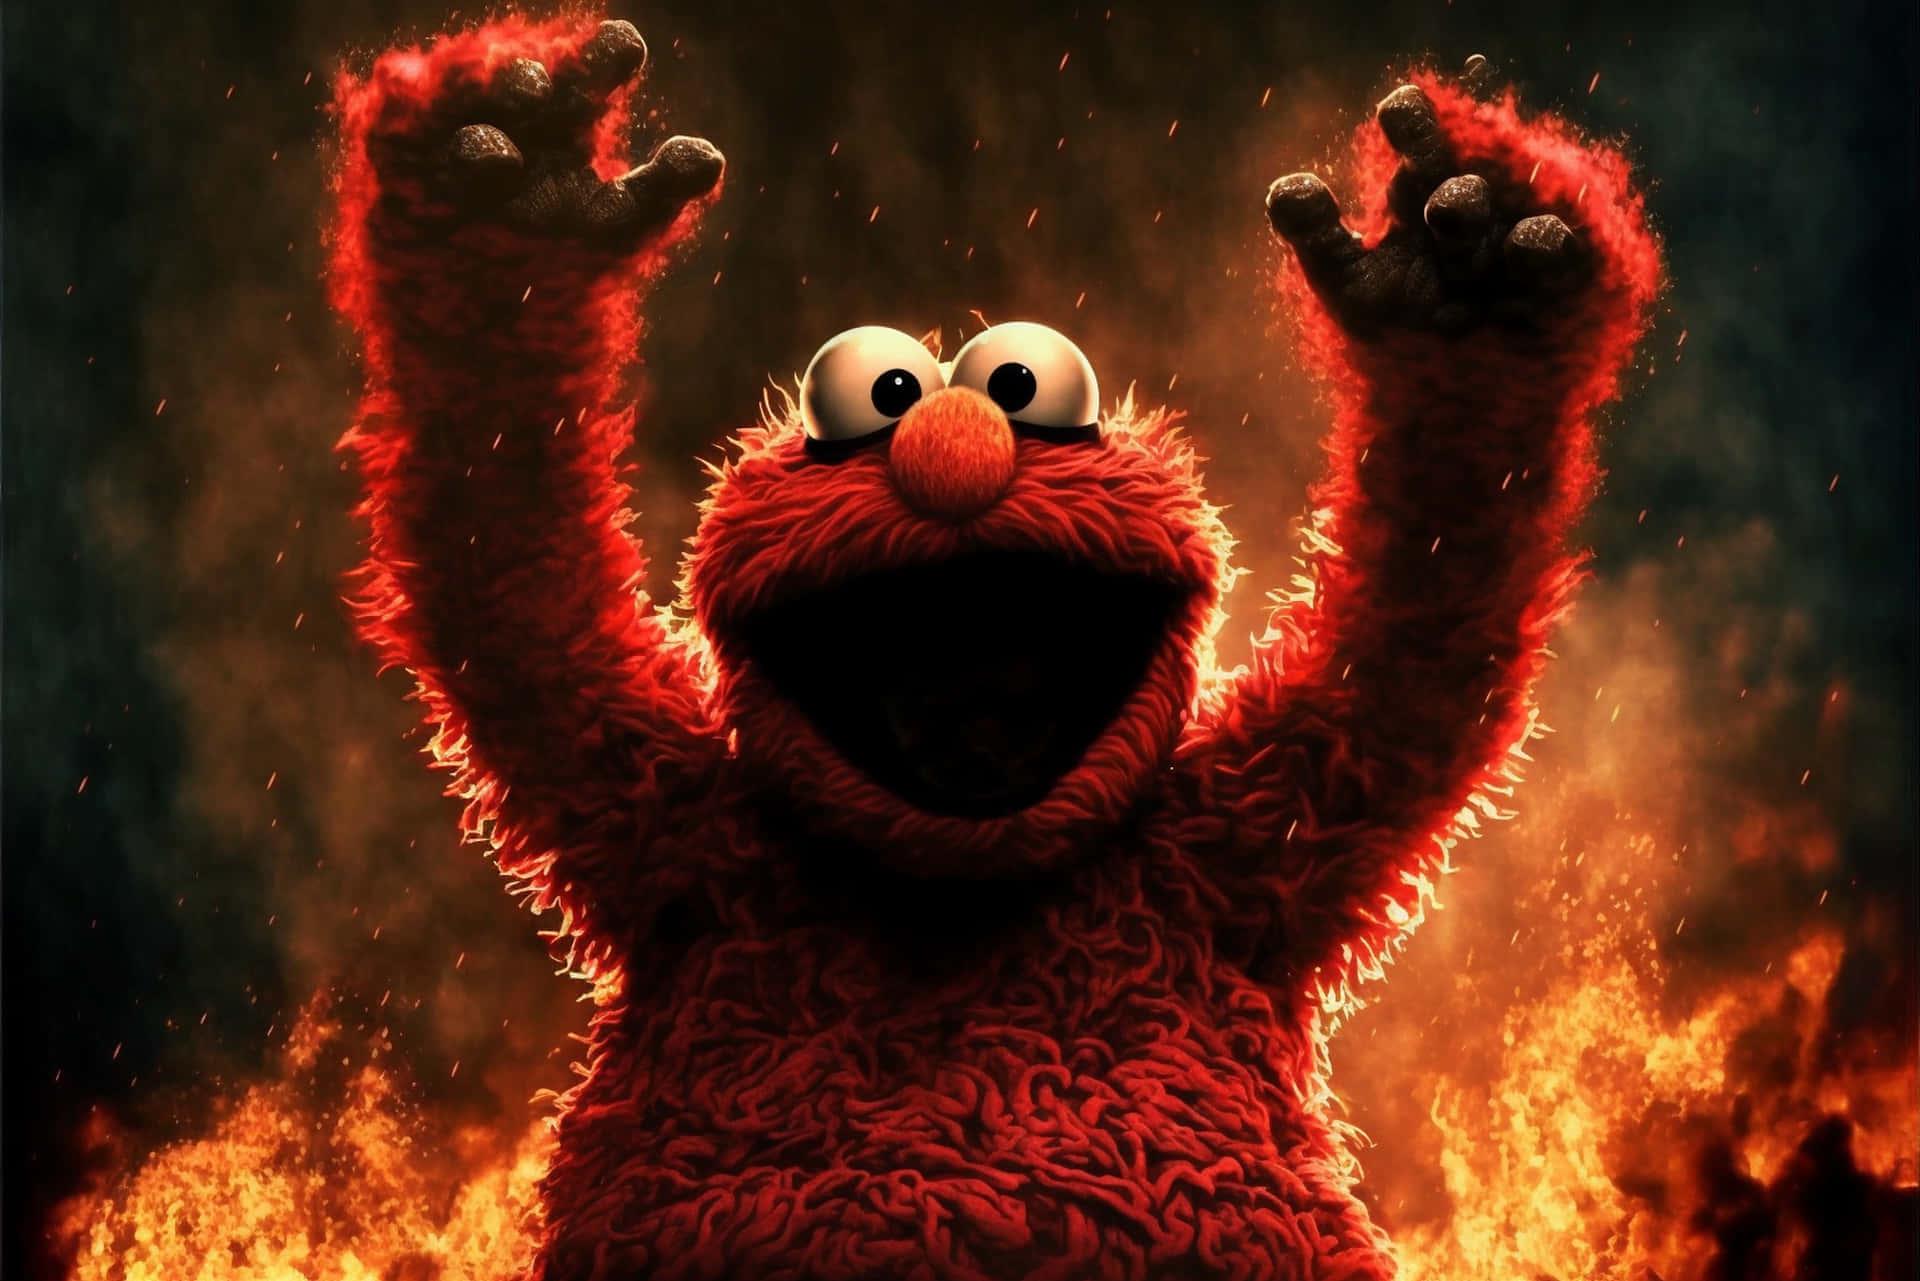 Adorable Elmo Spreading Joy And Happiness Wallpaper